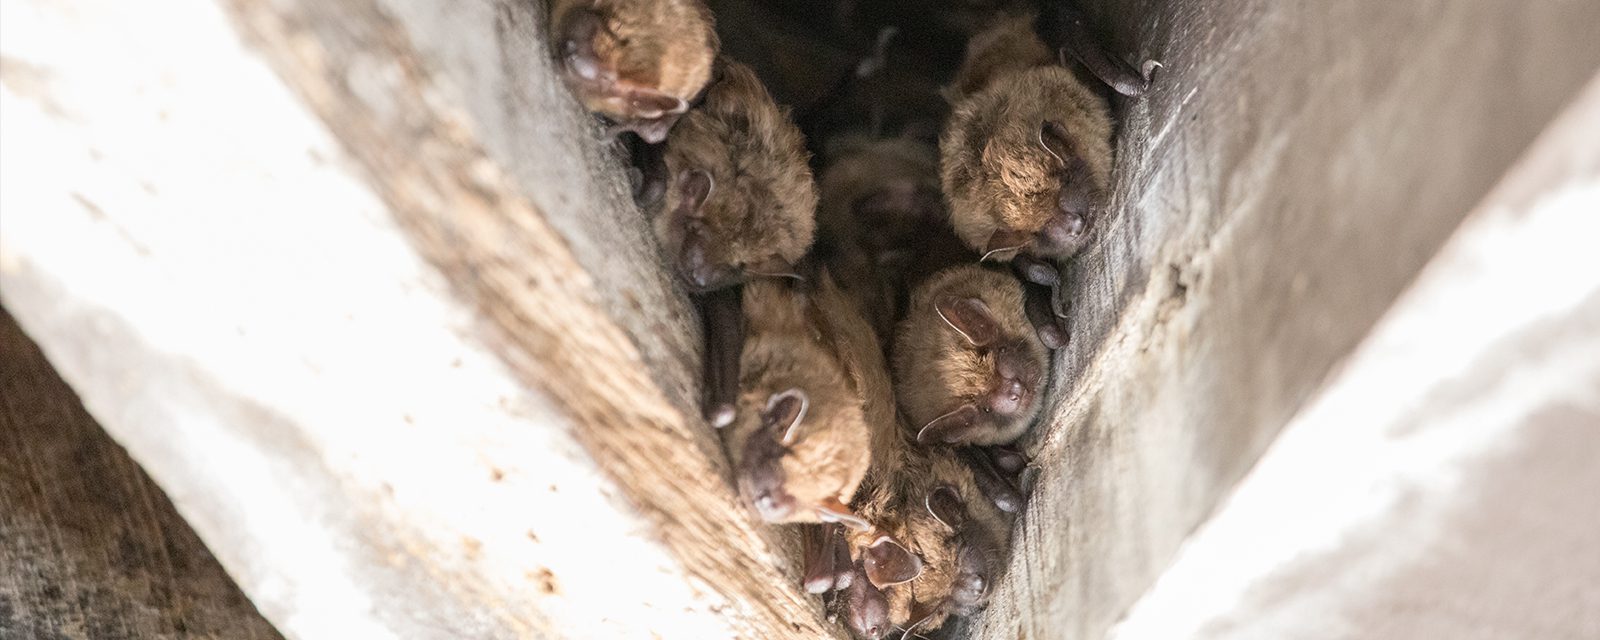 Multiple wild bats hanging from a wooden ceiling